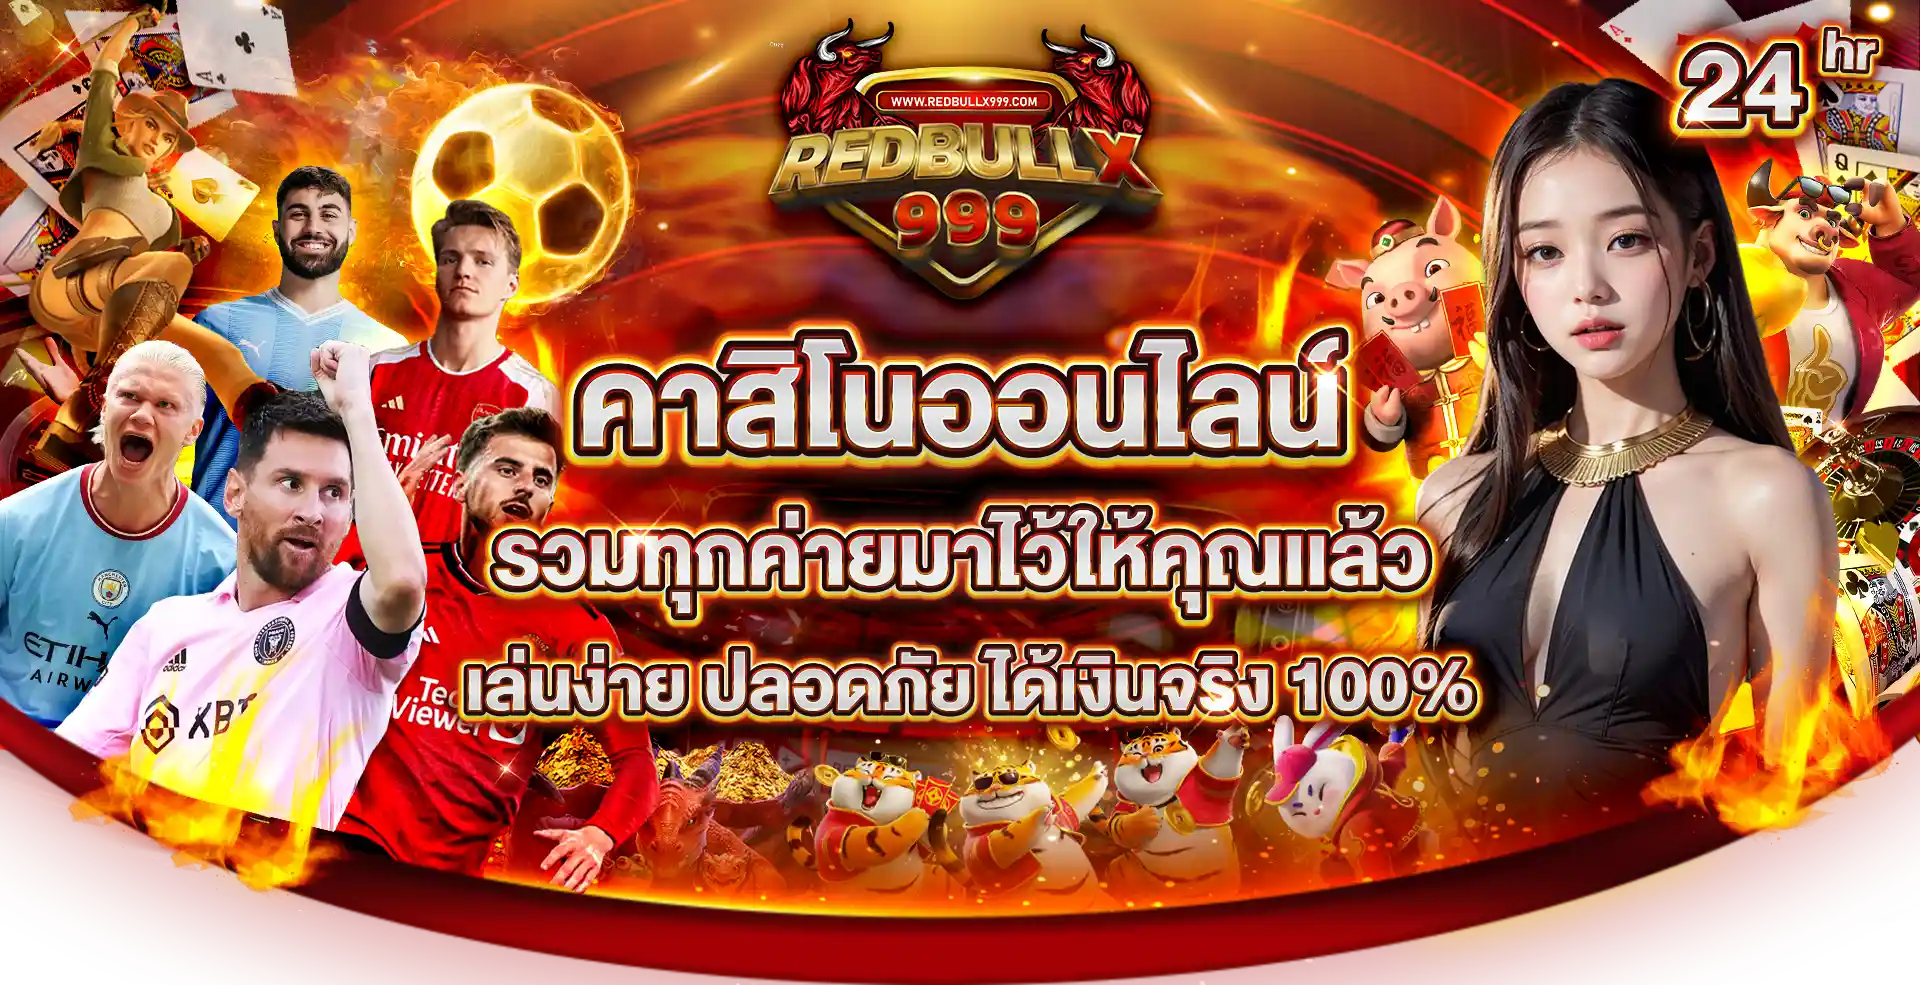 X banner PC 24.08.66_result